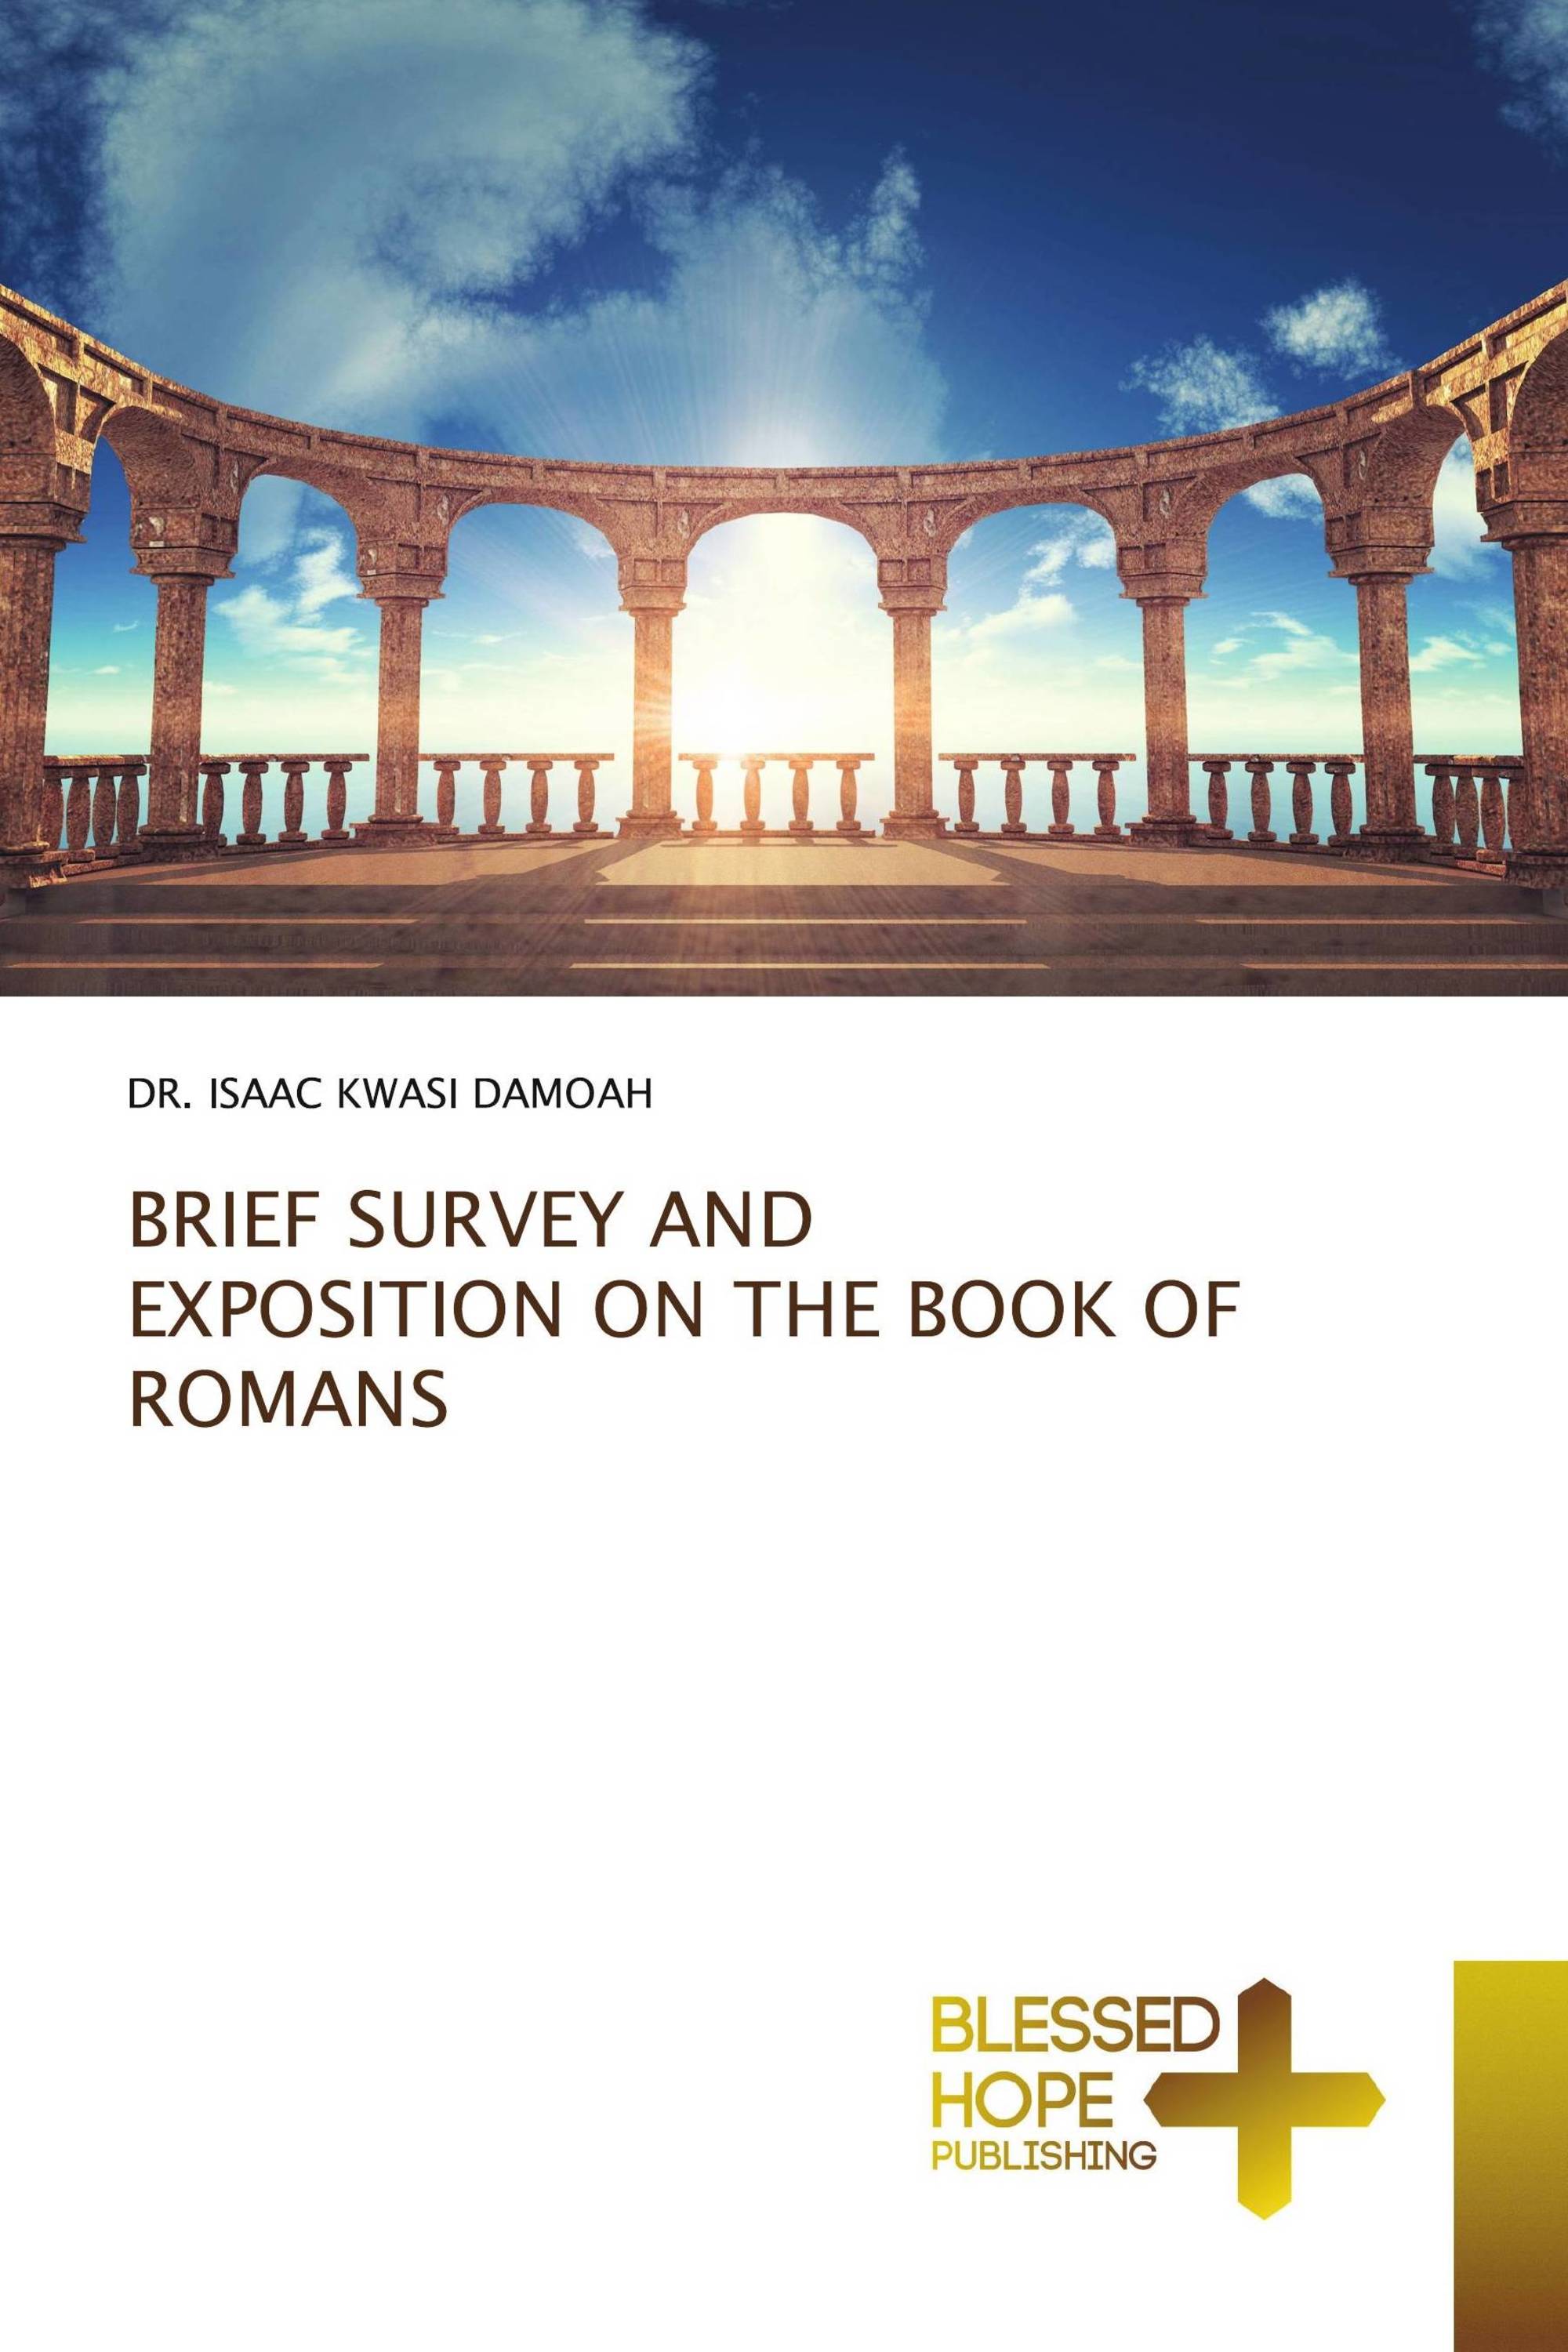 BRIEF SURVEY AND EXPOSITION ON THE BOOK OF ROMANS